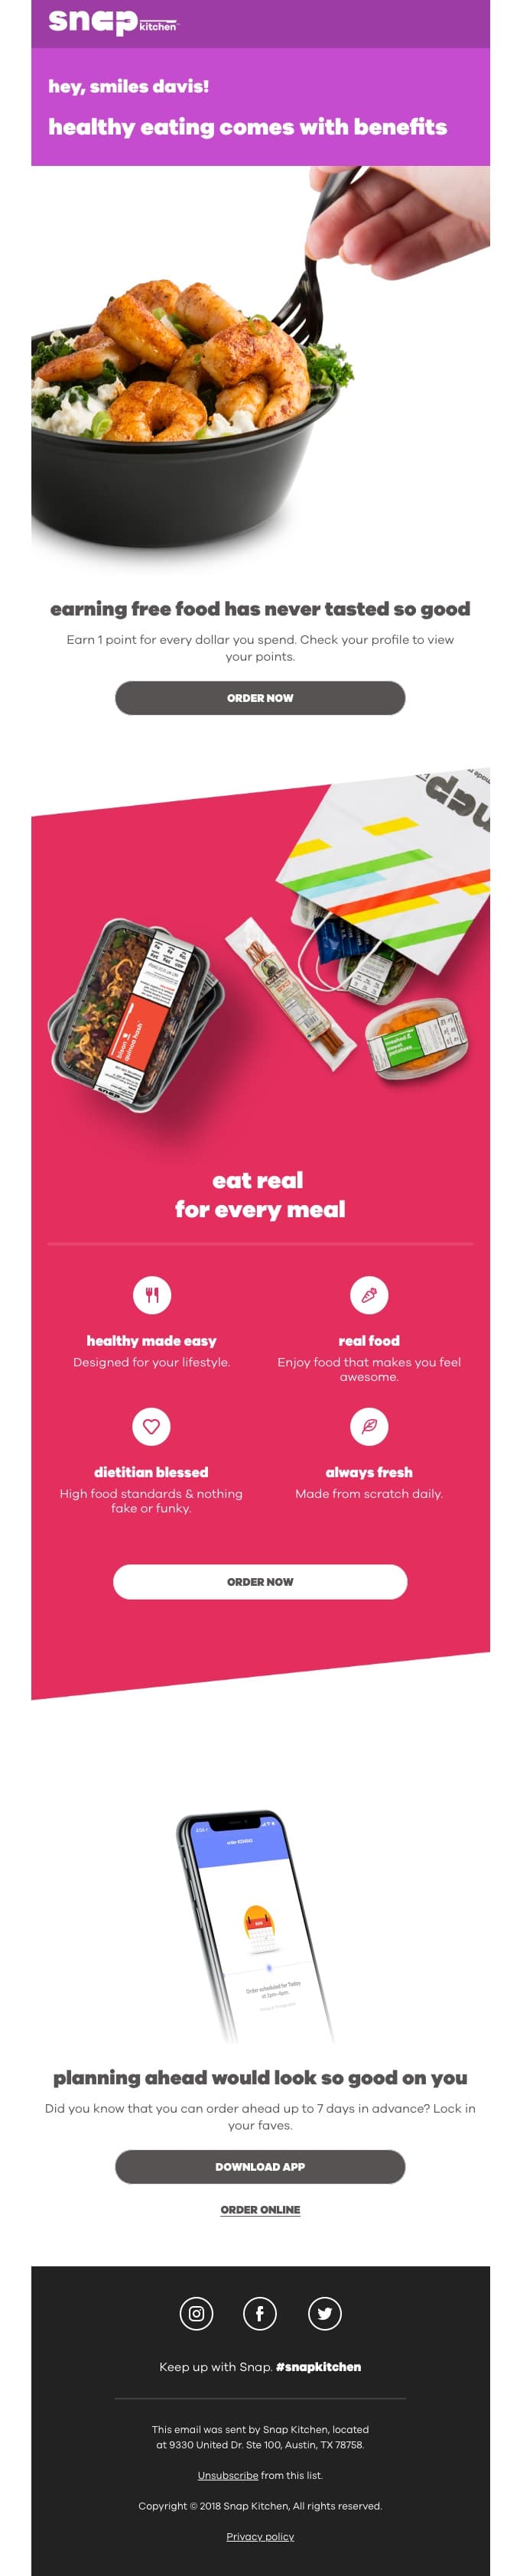 Earn Free Food Promotion with Snap Kitchen